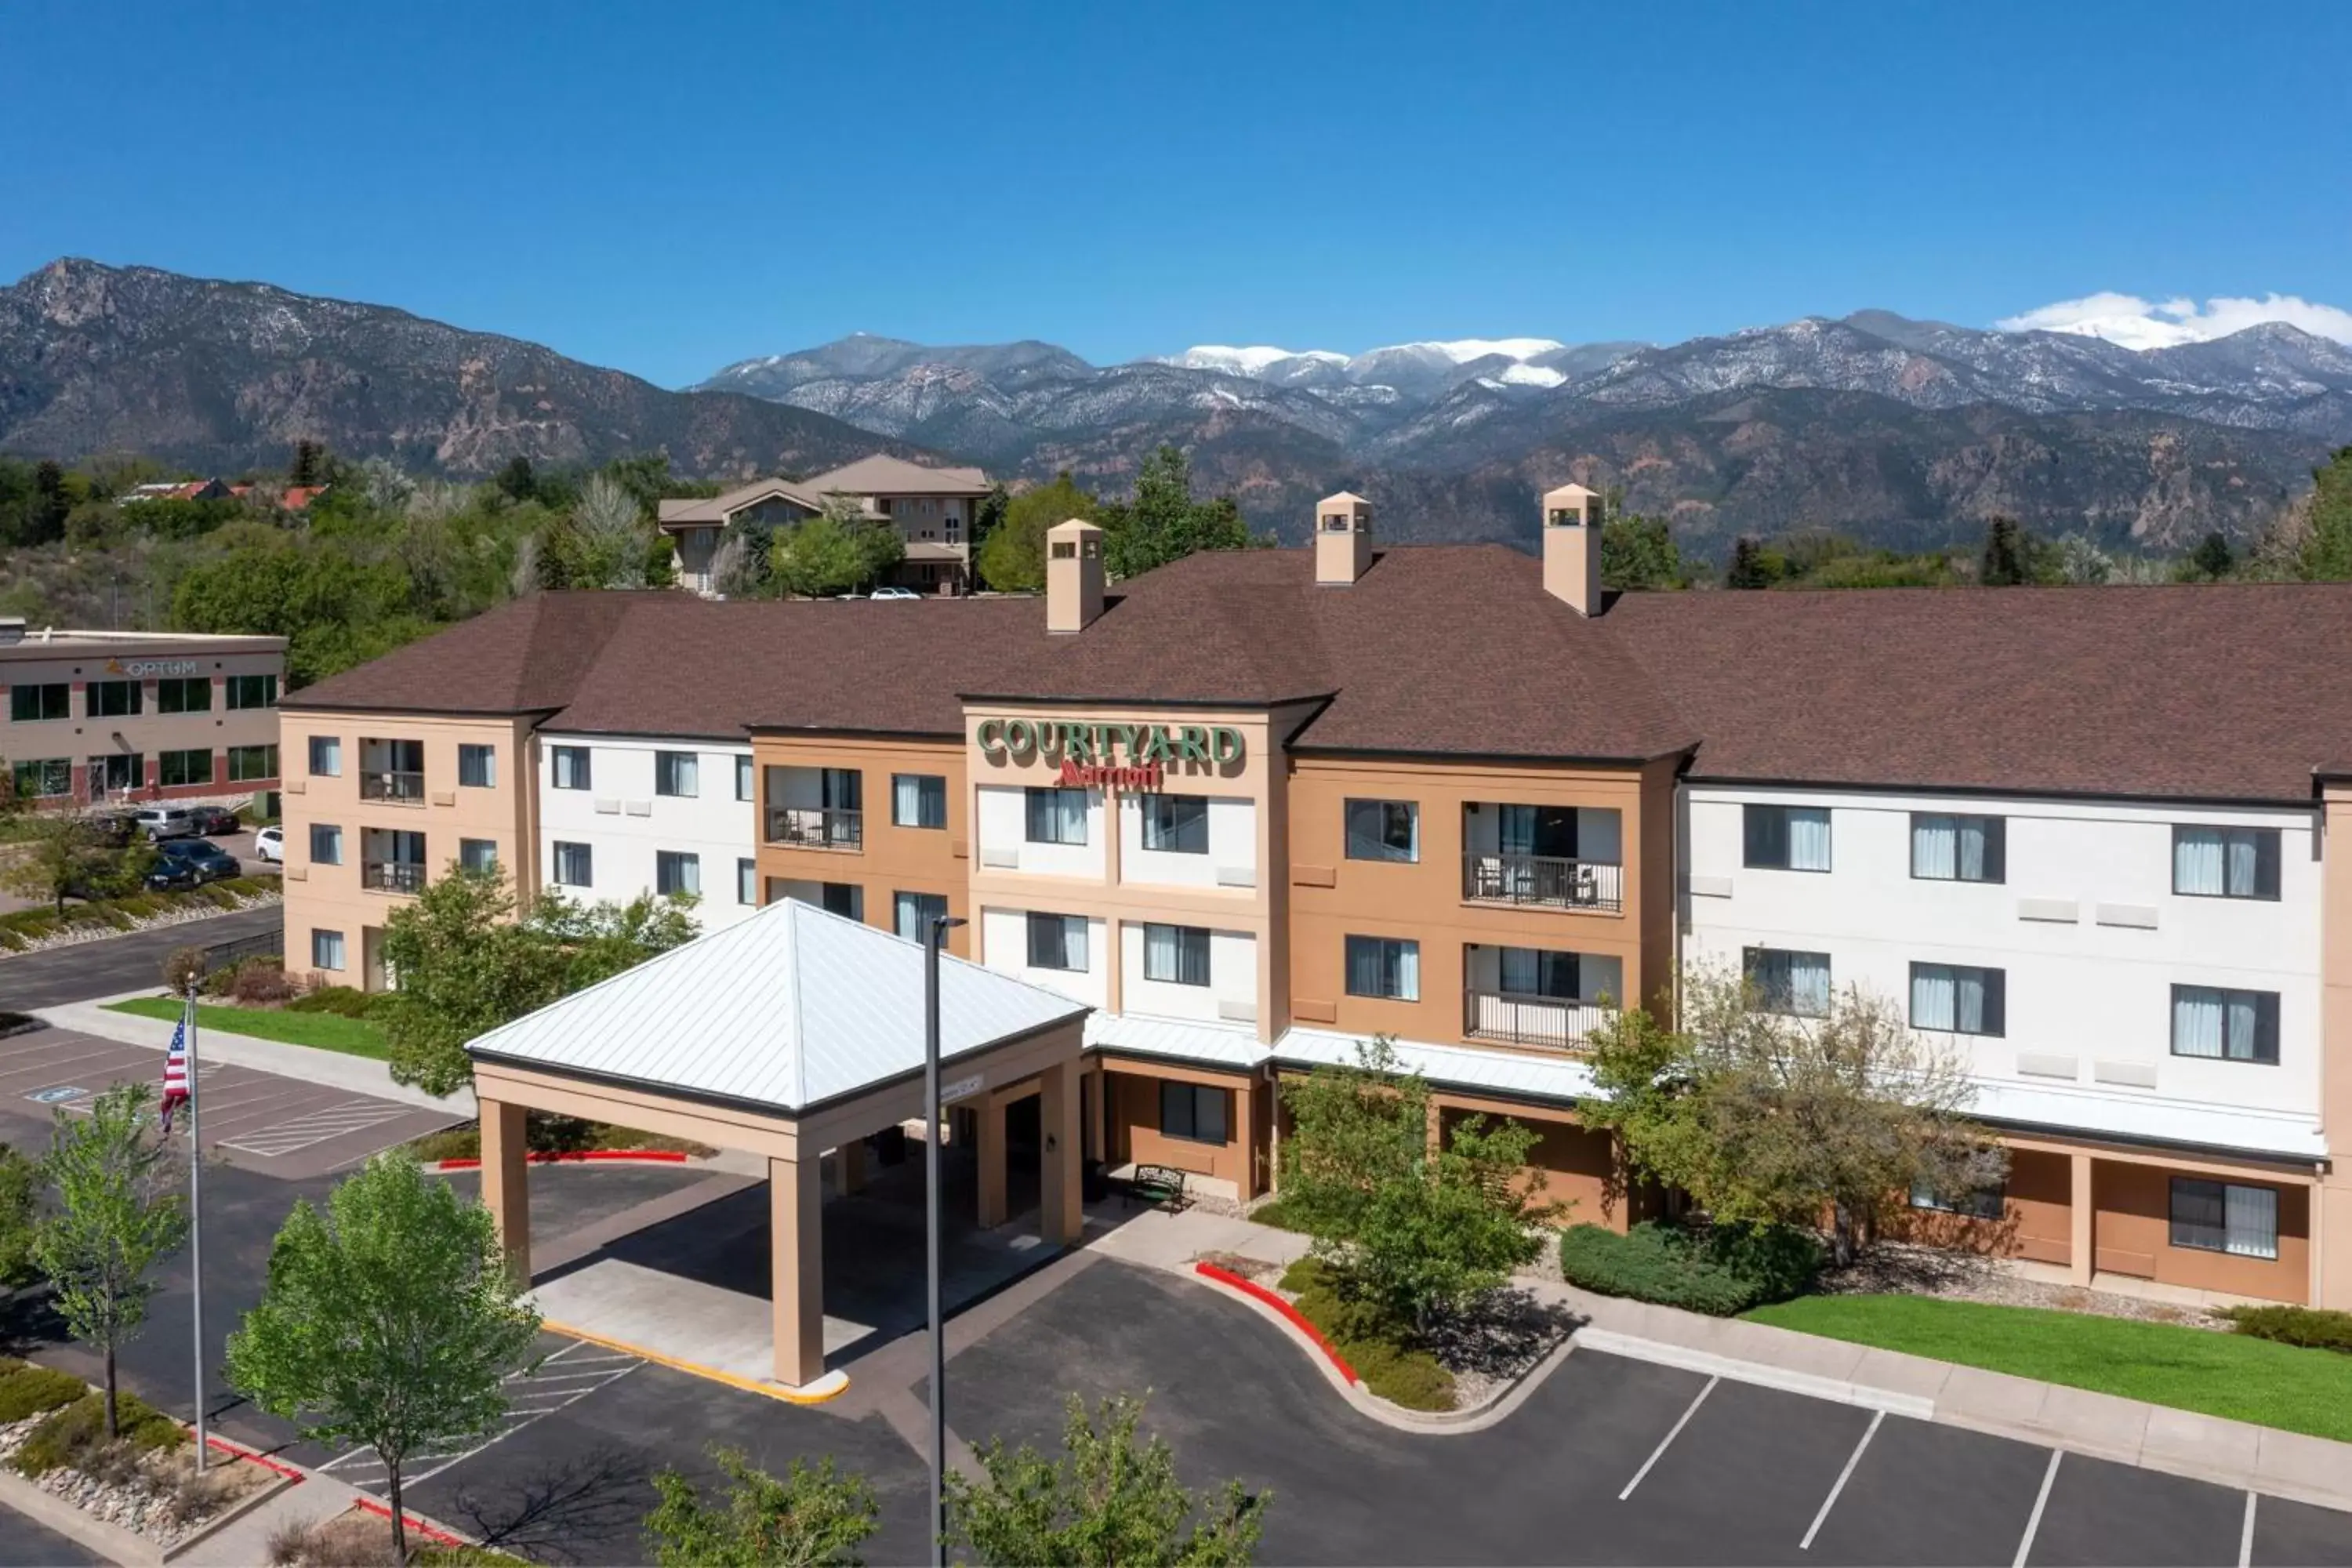 Property Building in Courtyard by Marriott Colorado Springs South